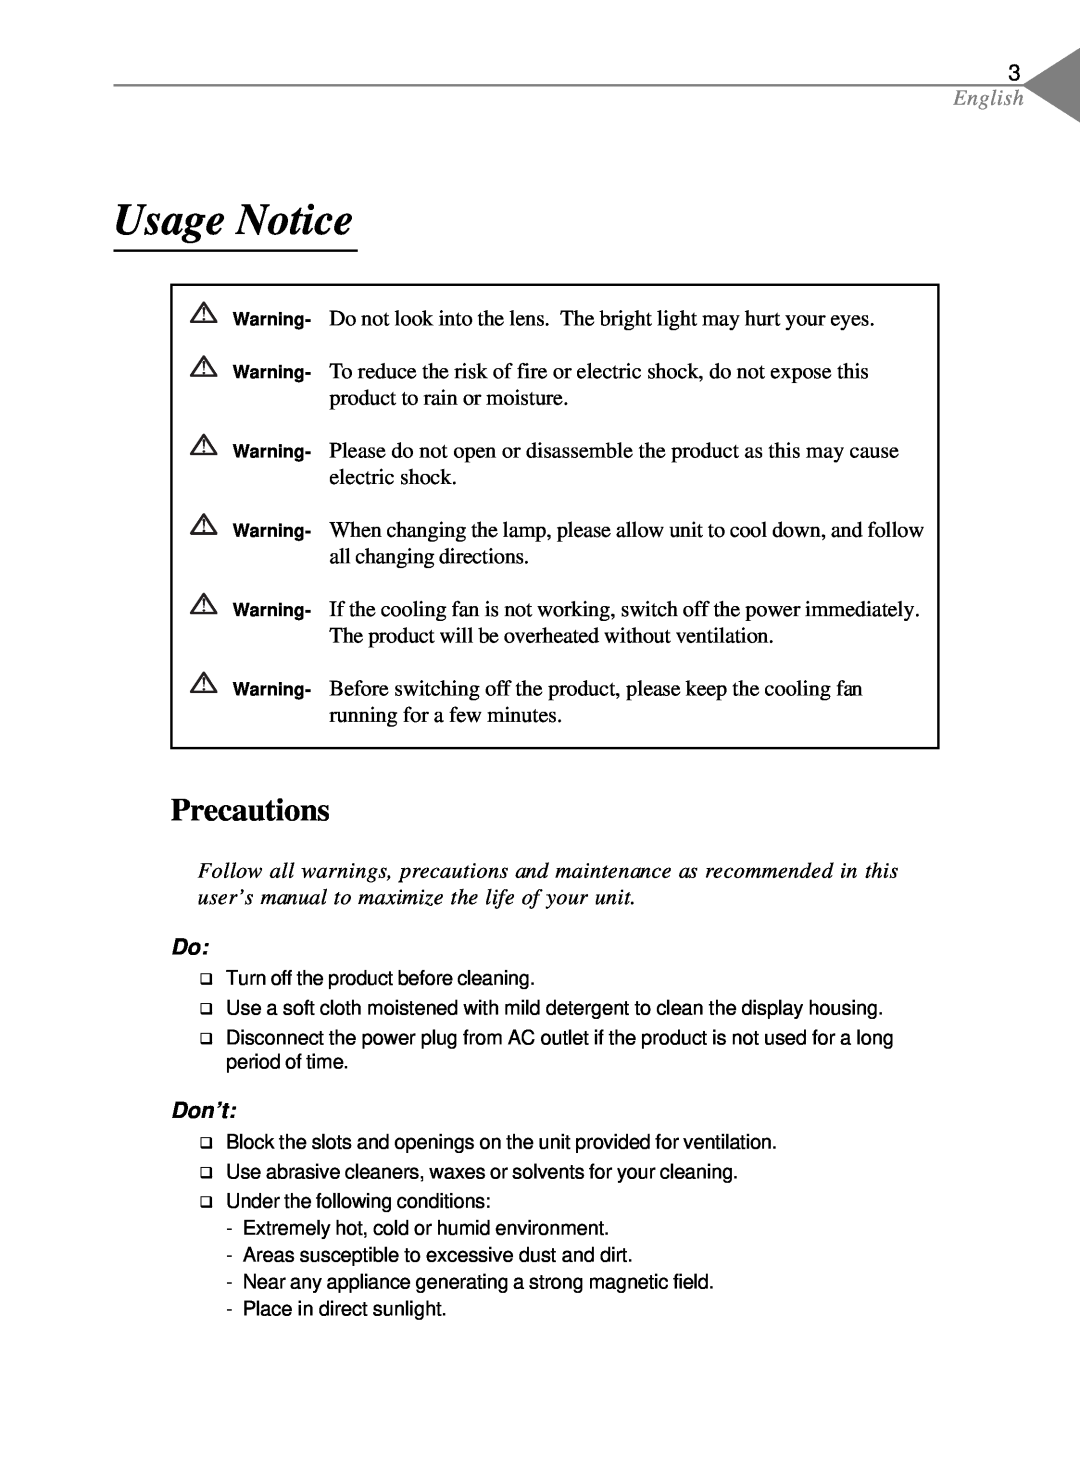 Optoma Technology EP550 specifications Usage Notice, Precautions, English, Don’t 